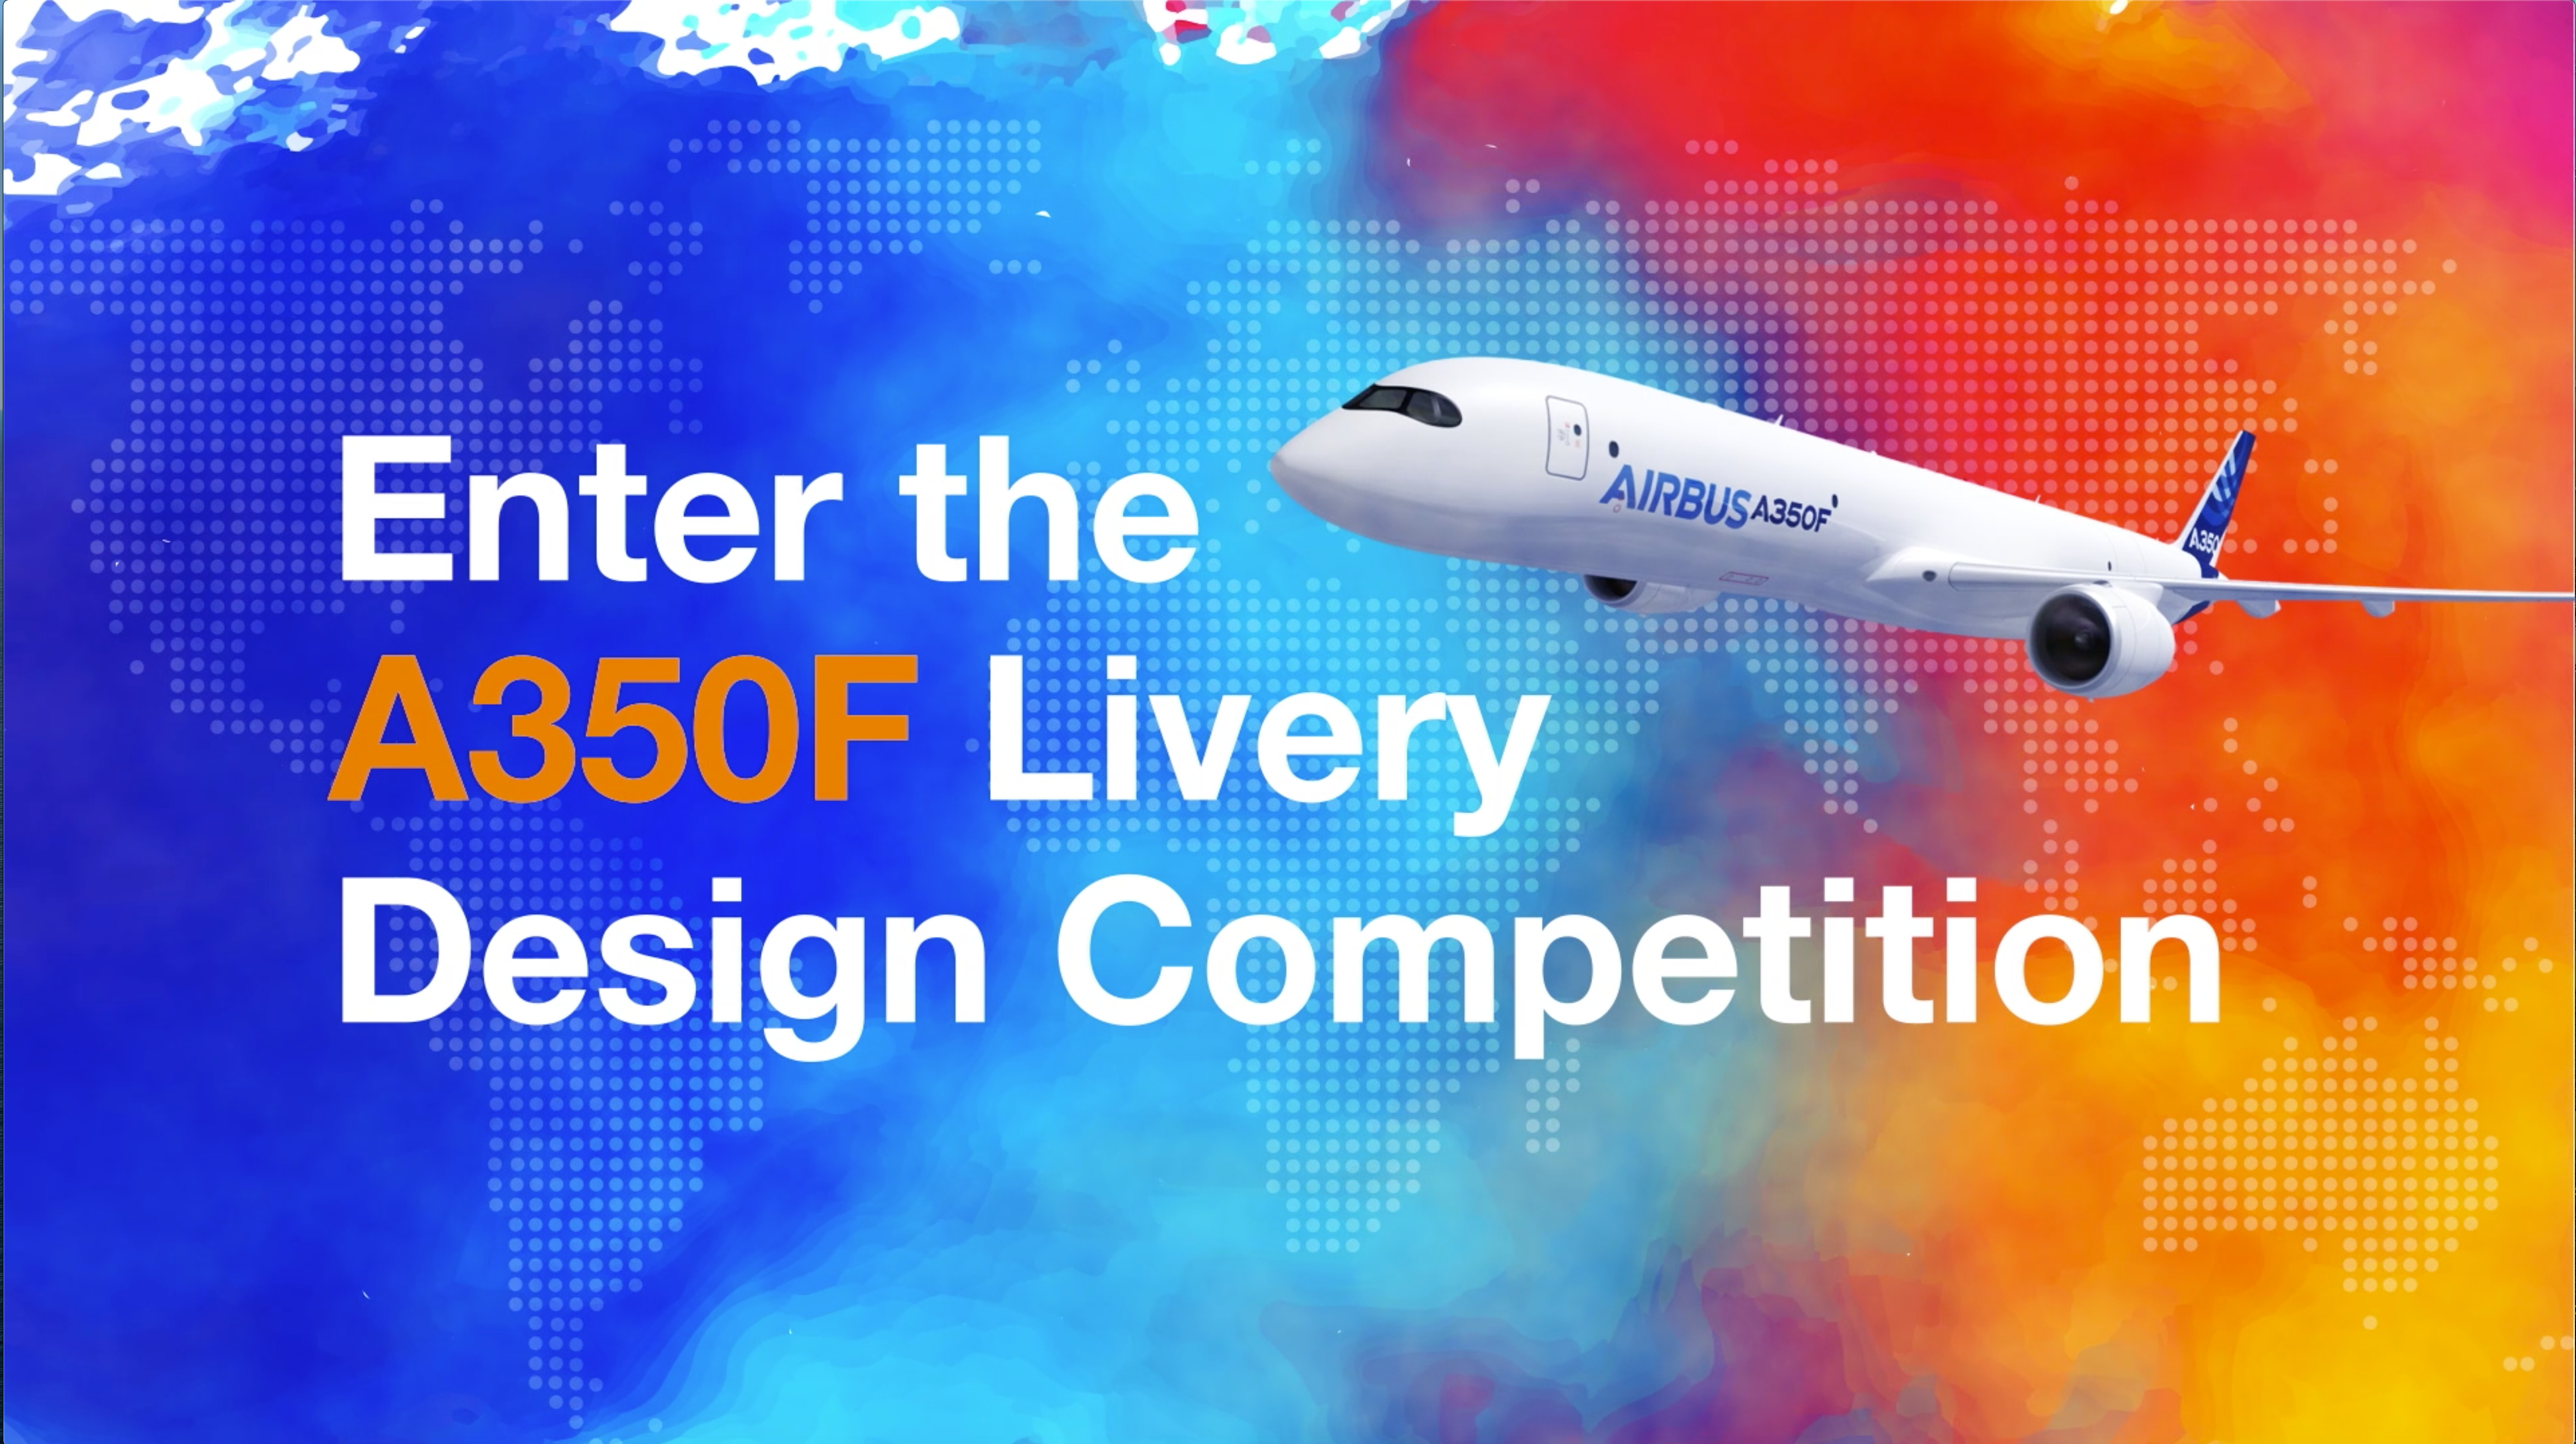 Airbus Wants You To Design The Livery For The A350F